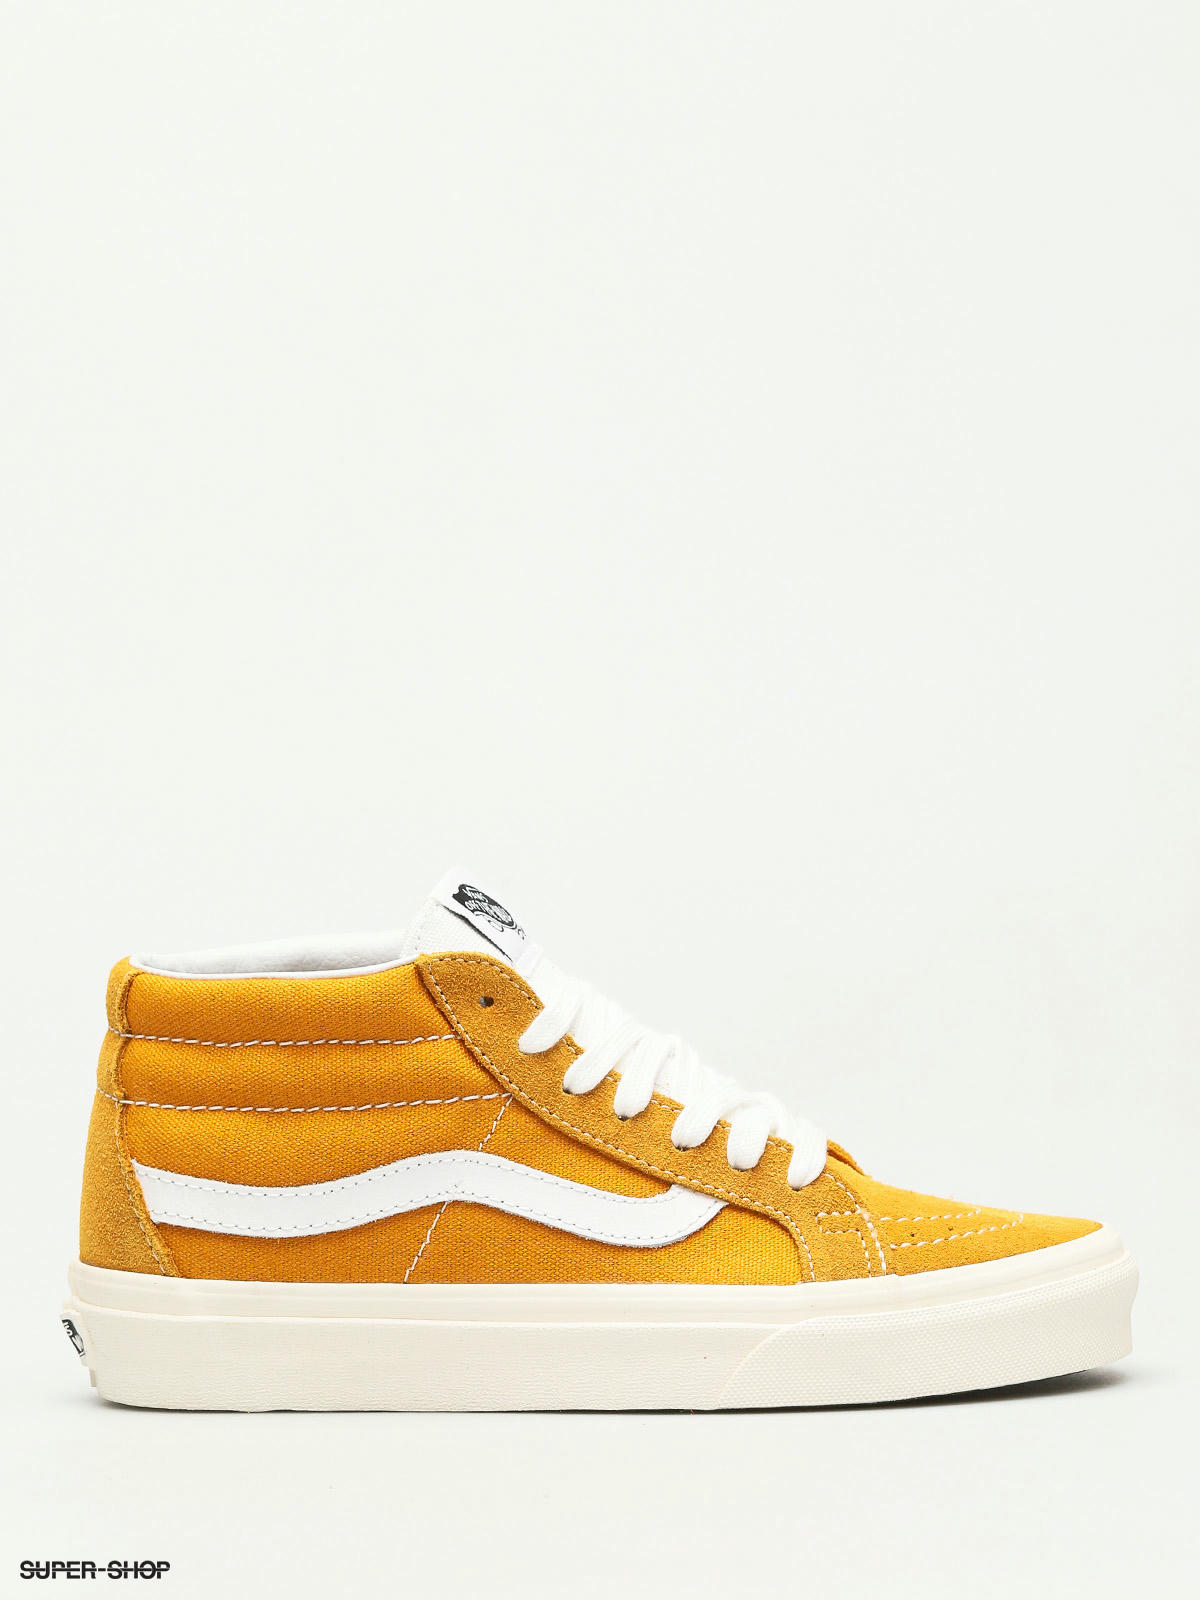 vans mid cut shoes Online Shopping for 